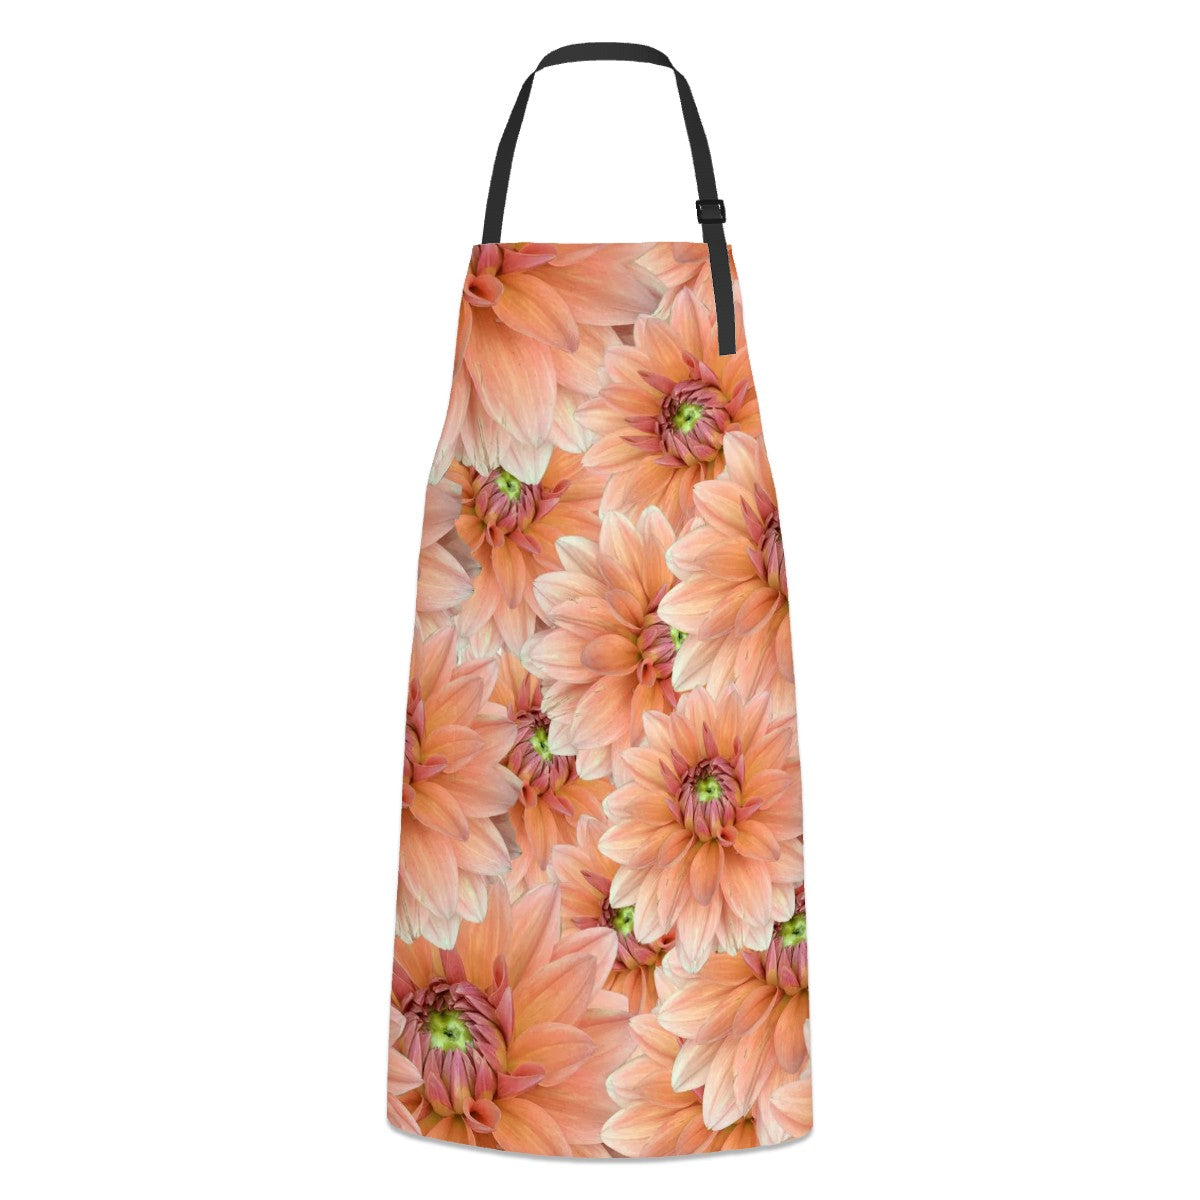 Apron with two pockets pink dahlia pattern